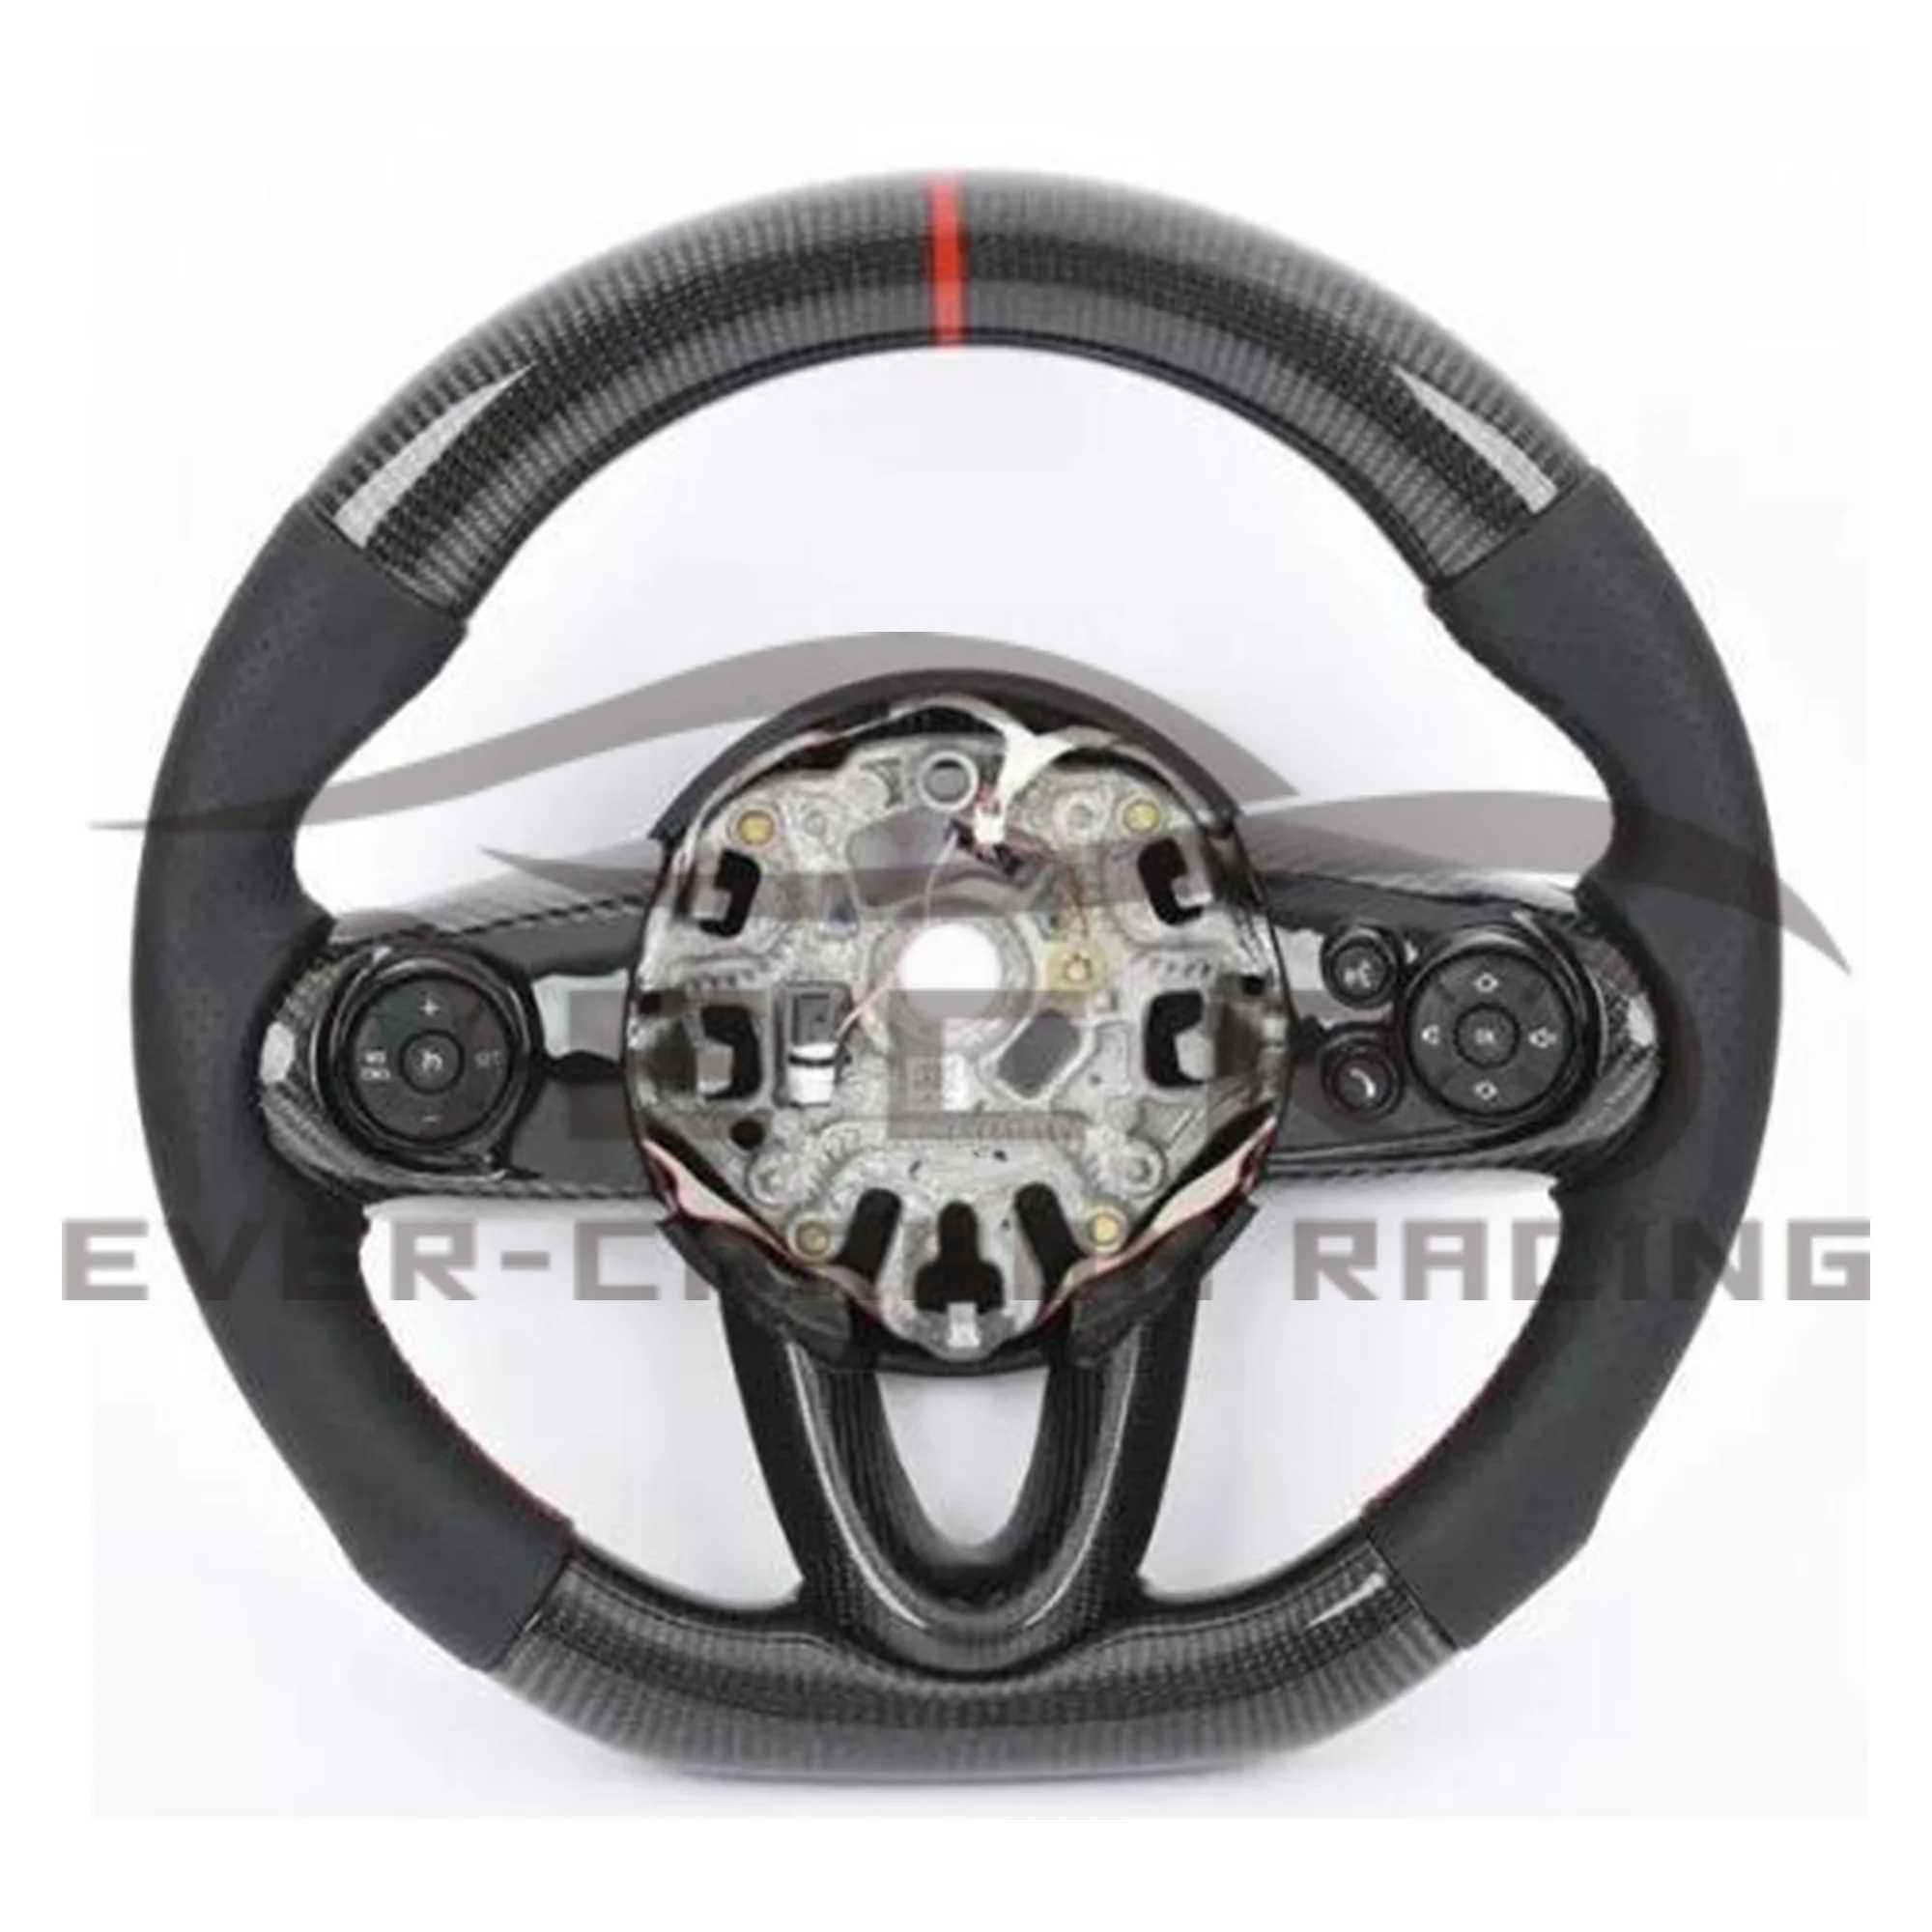 

Ever-Carbon Racing(ECR) Best Selling Car Accessories Carbon Fiber Steering Wheel For BMW MINI Cooper R55 R56 R57 R58 R59